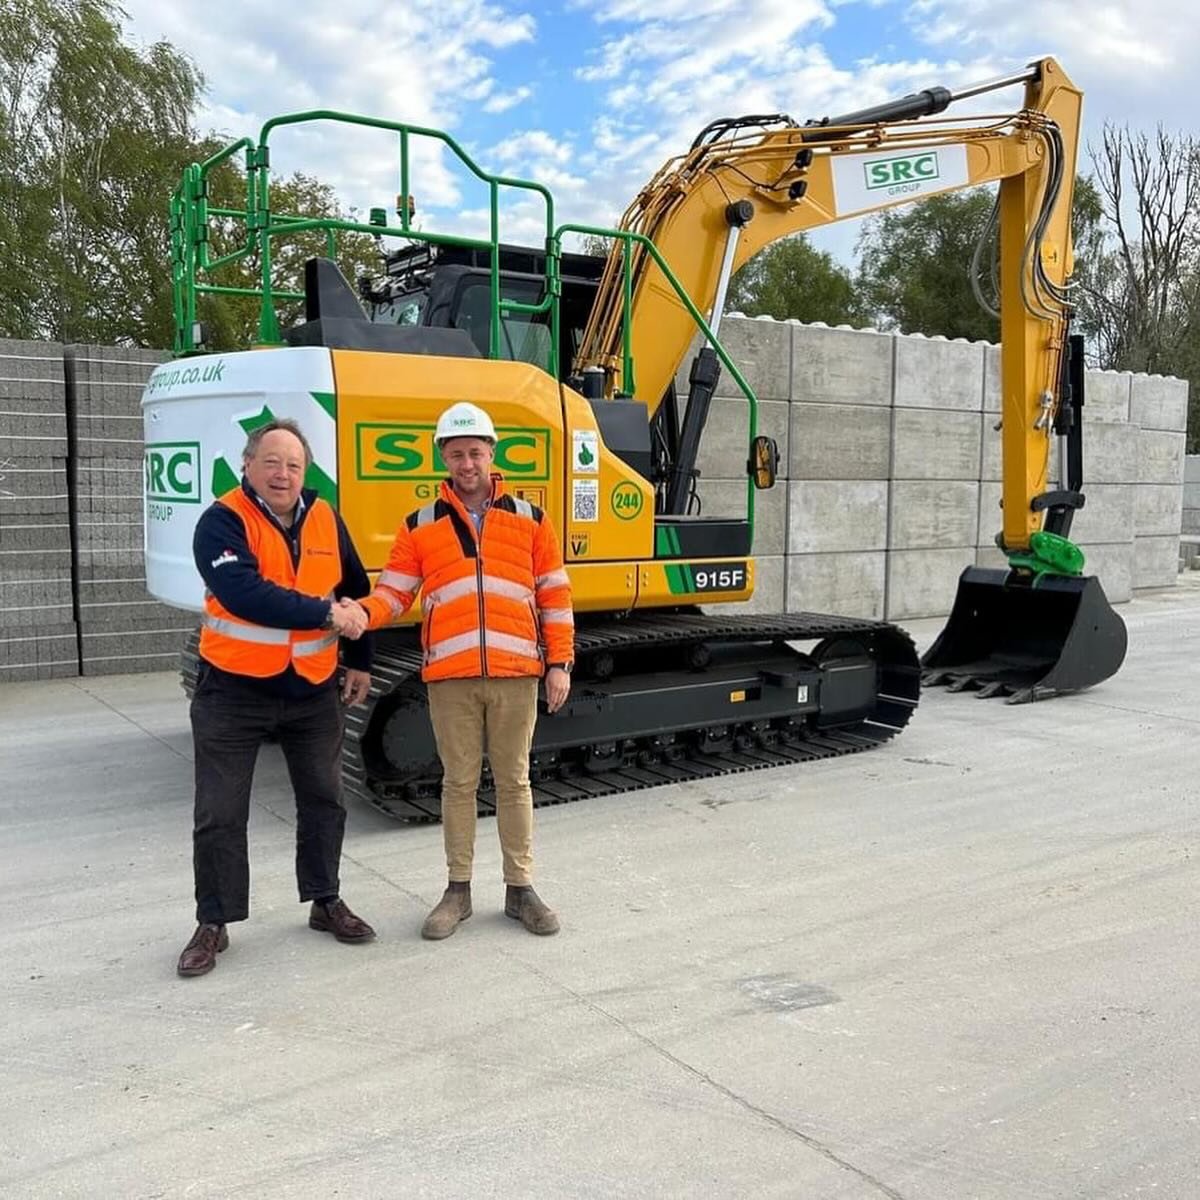 Tobin Plant Ltd/ LiuGong Machinery UK are proud to have supplied a new LiuGong 915F DM, 16 tonne excavator to SRC today. Thank you for your valued order Ollie and Brett, it has been 6 years now that we have supplied @_srcgroup_ with LiuGong equipment